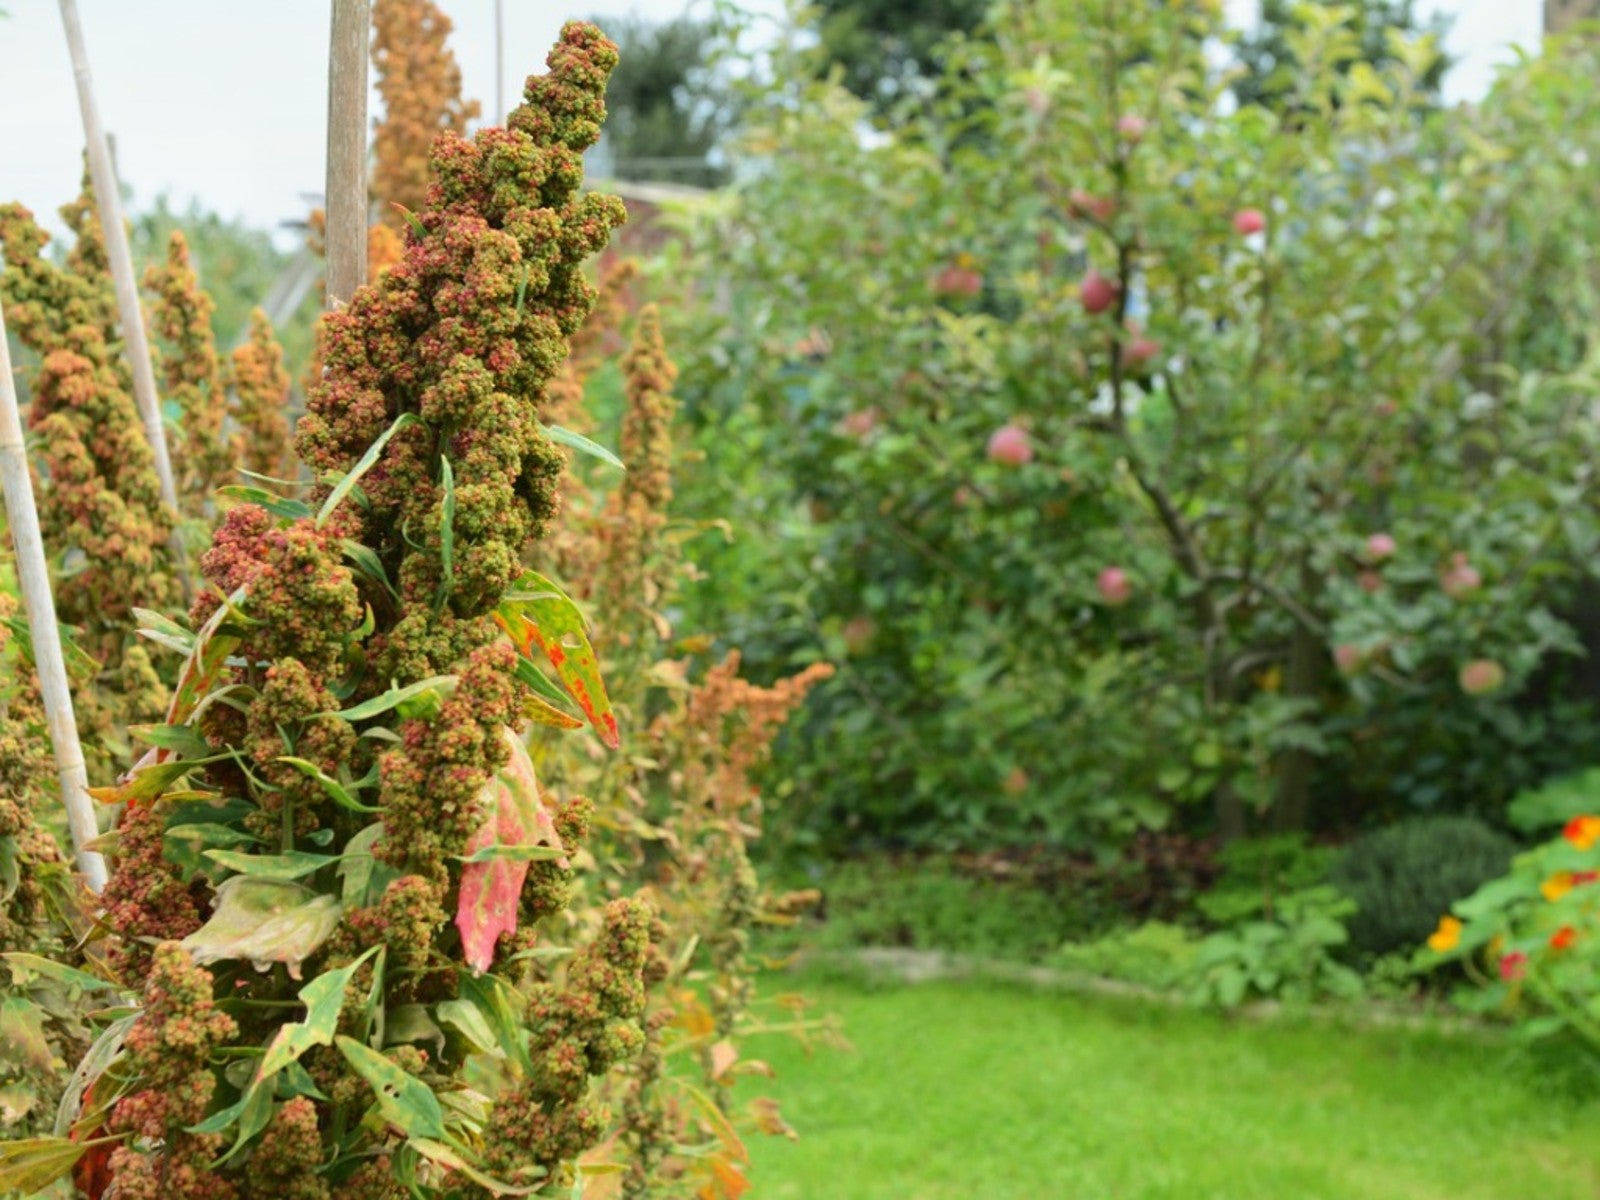 A close up of quinoa growing in a garden with fruit trees in the background